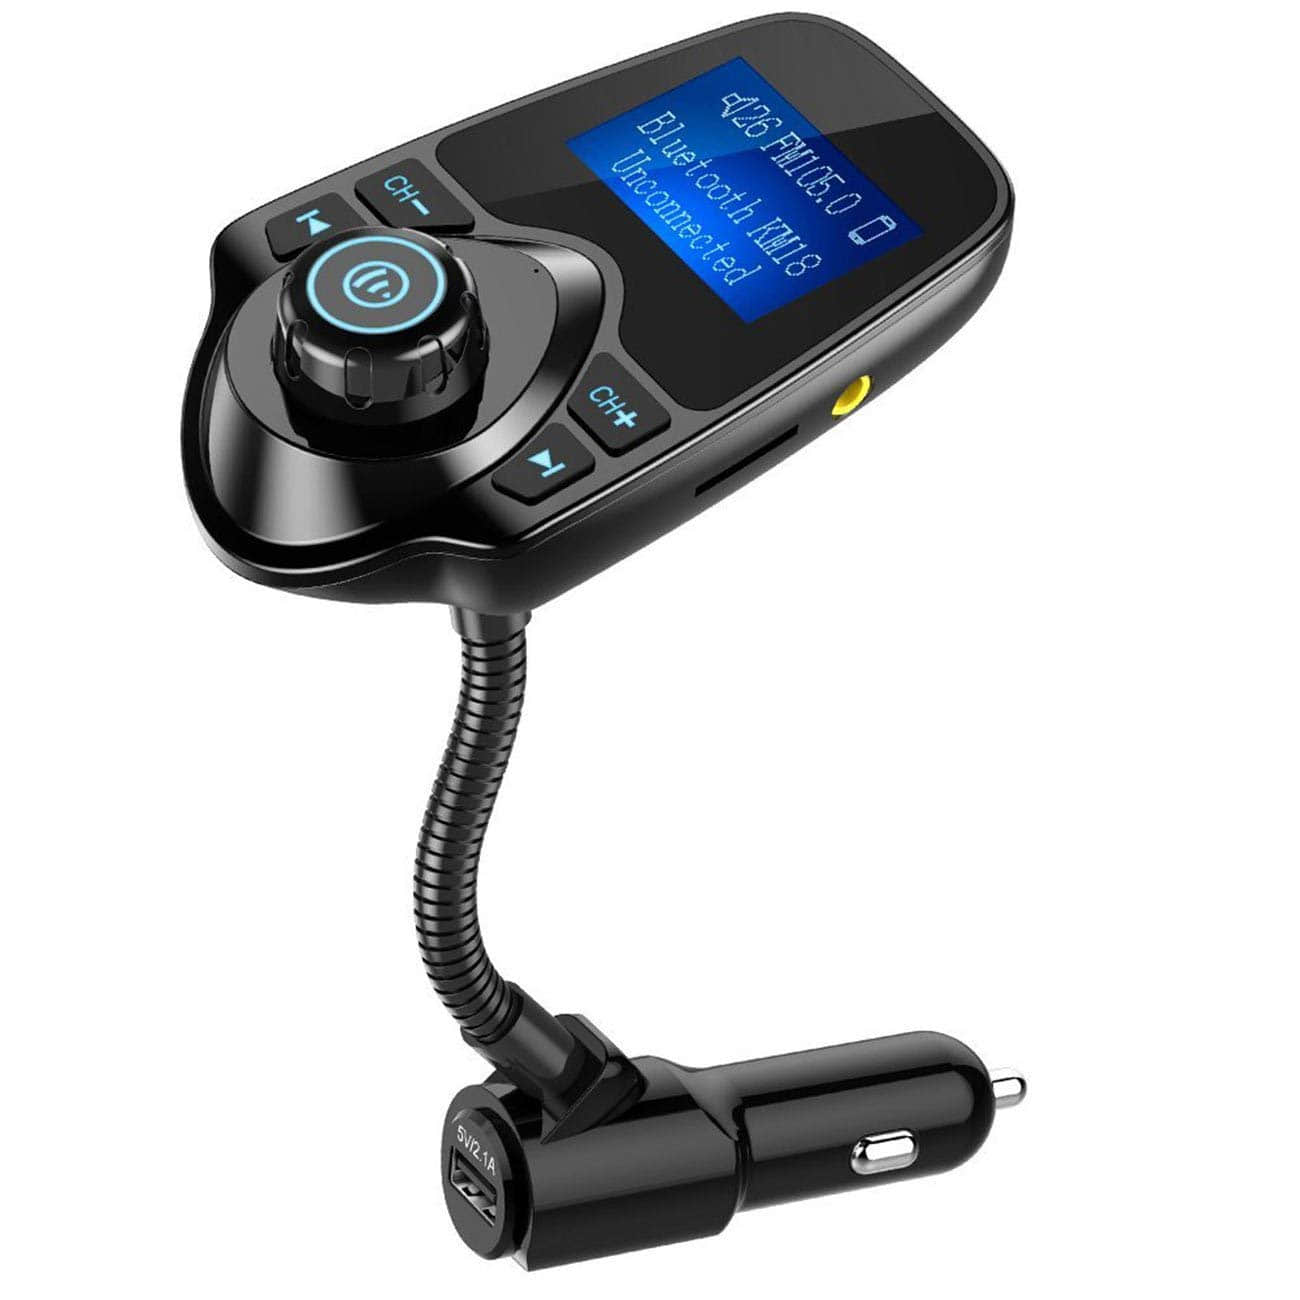 Nulaxy Wireless In-Car Bluetooth FM Transmitter Radio Adapter Handsfree Car Kit W 1.44 Inch Large Screen with USB Car Charger for All Smartphones Audio Players Supporting TF Card